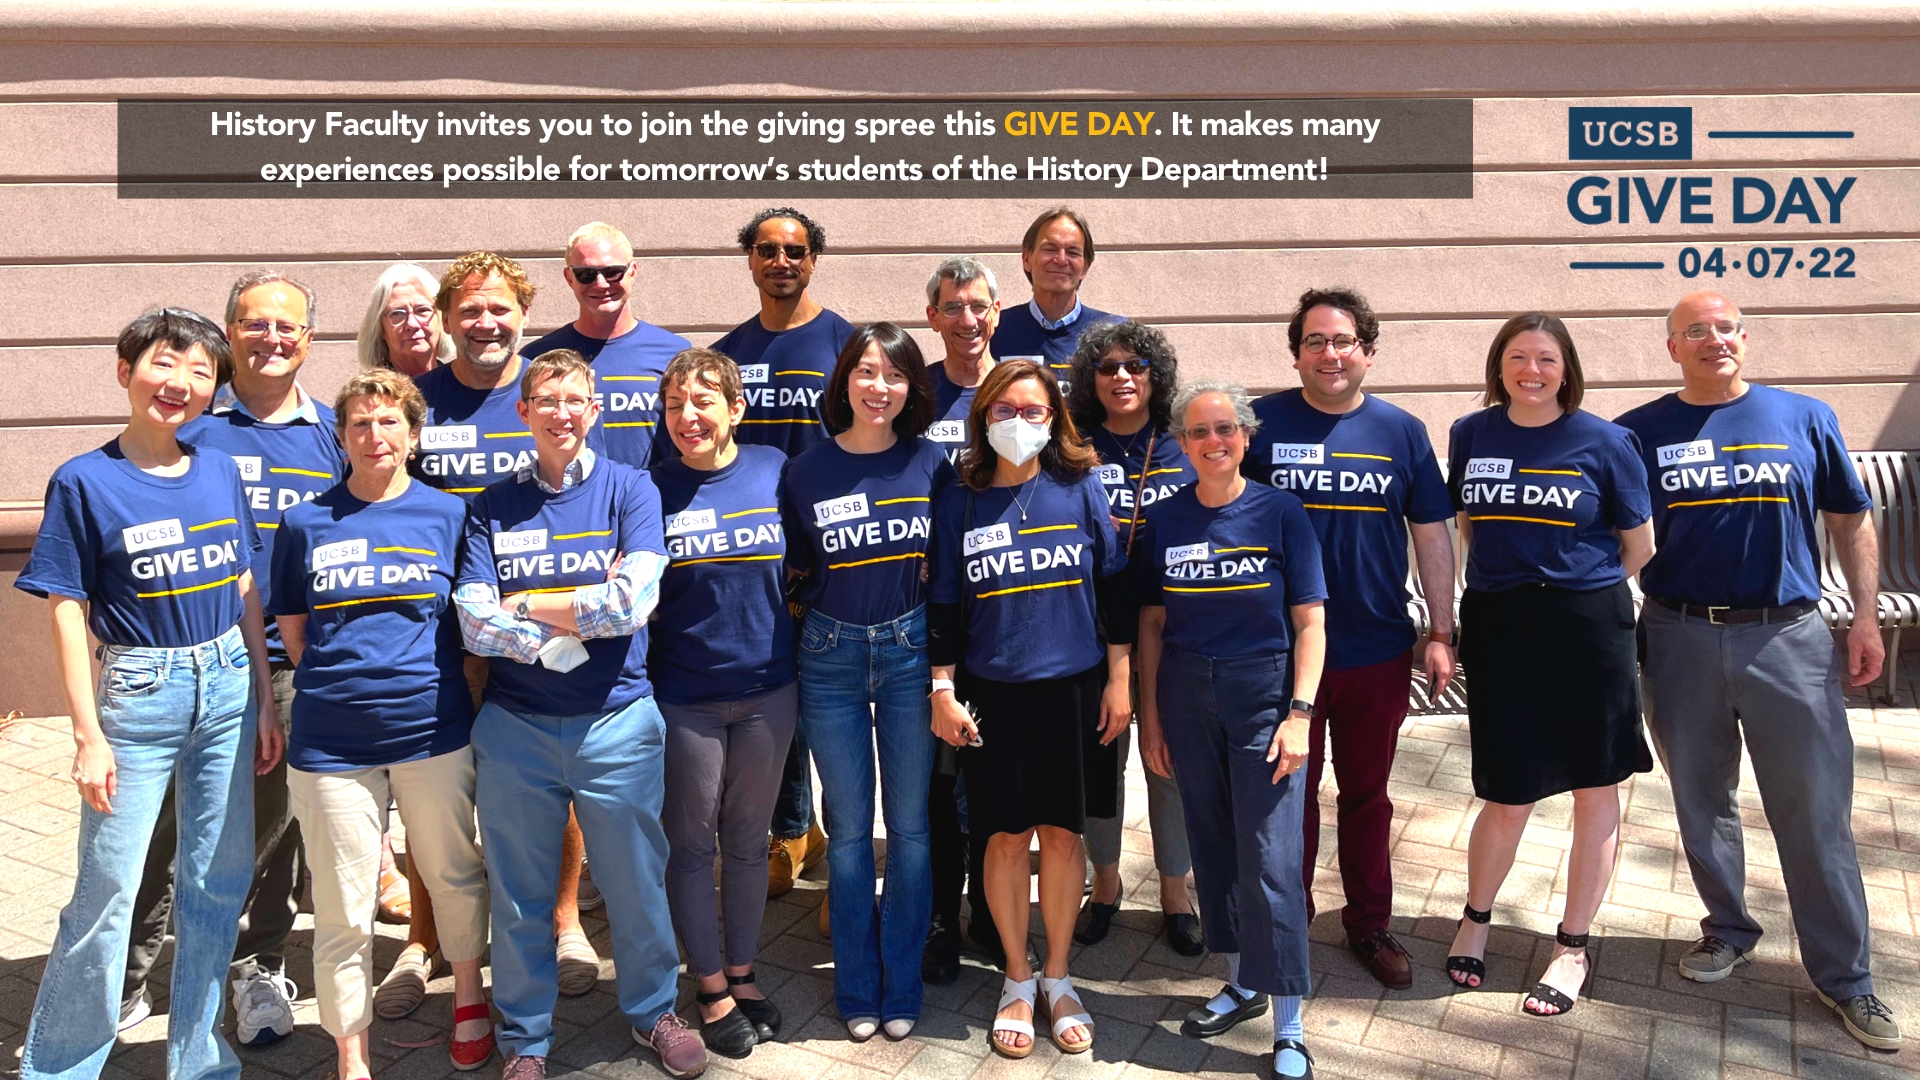 Flyer for UCSB Give Day on April 7, 2022: History Faculty invites you to join the giving spree this Give Day. It makes many experiences possible for tomorrow's students of the History Department!